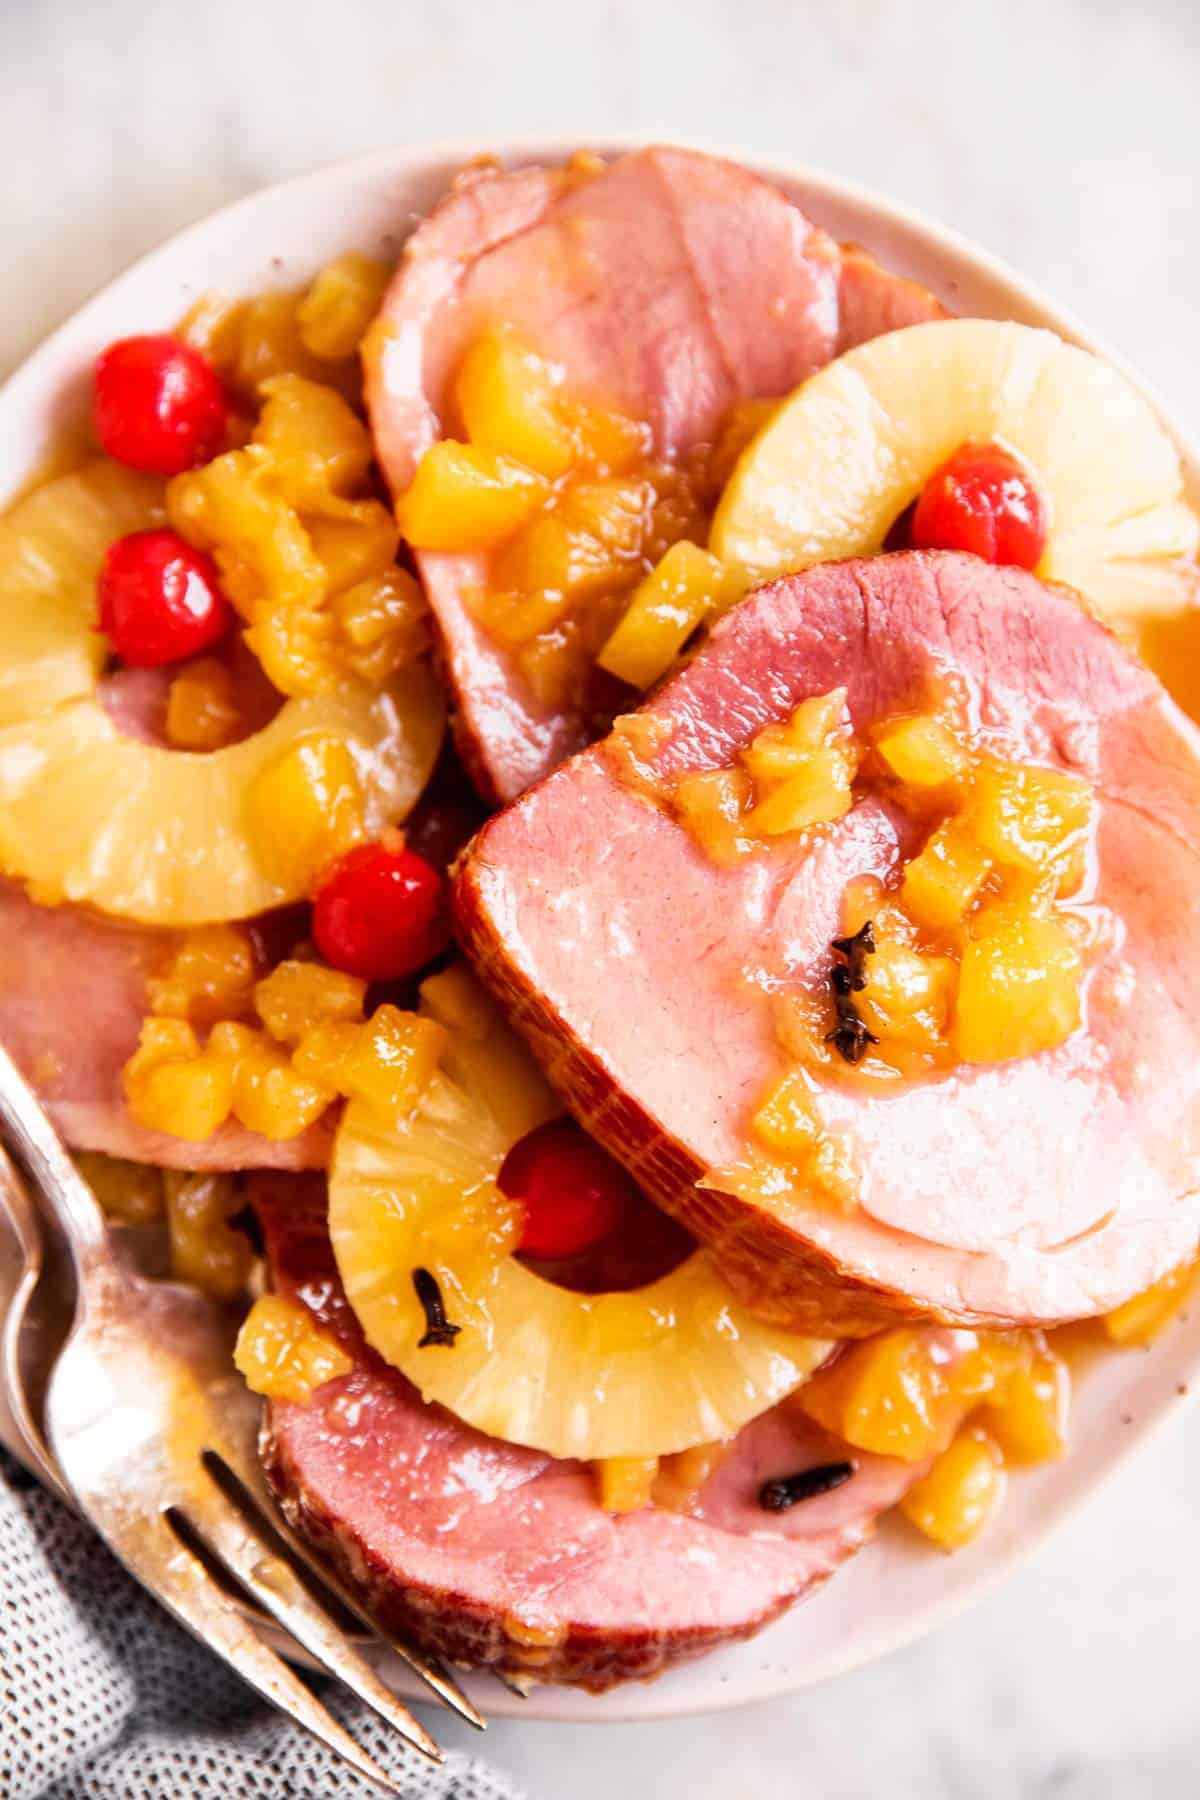 slices of cooked ham with pineapple rings and maraschino cherries on white plate